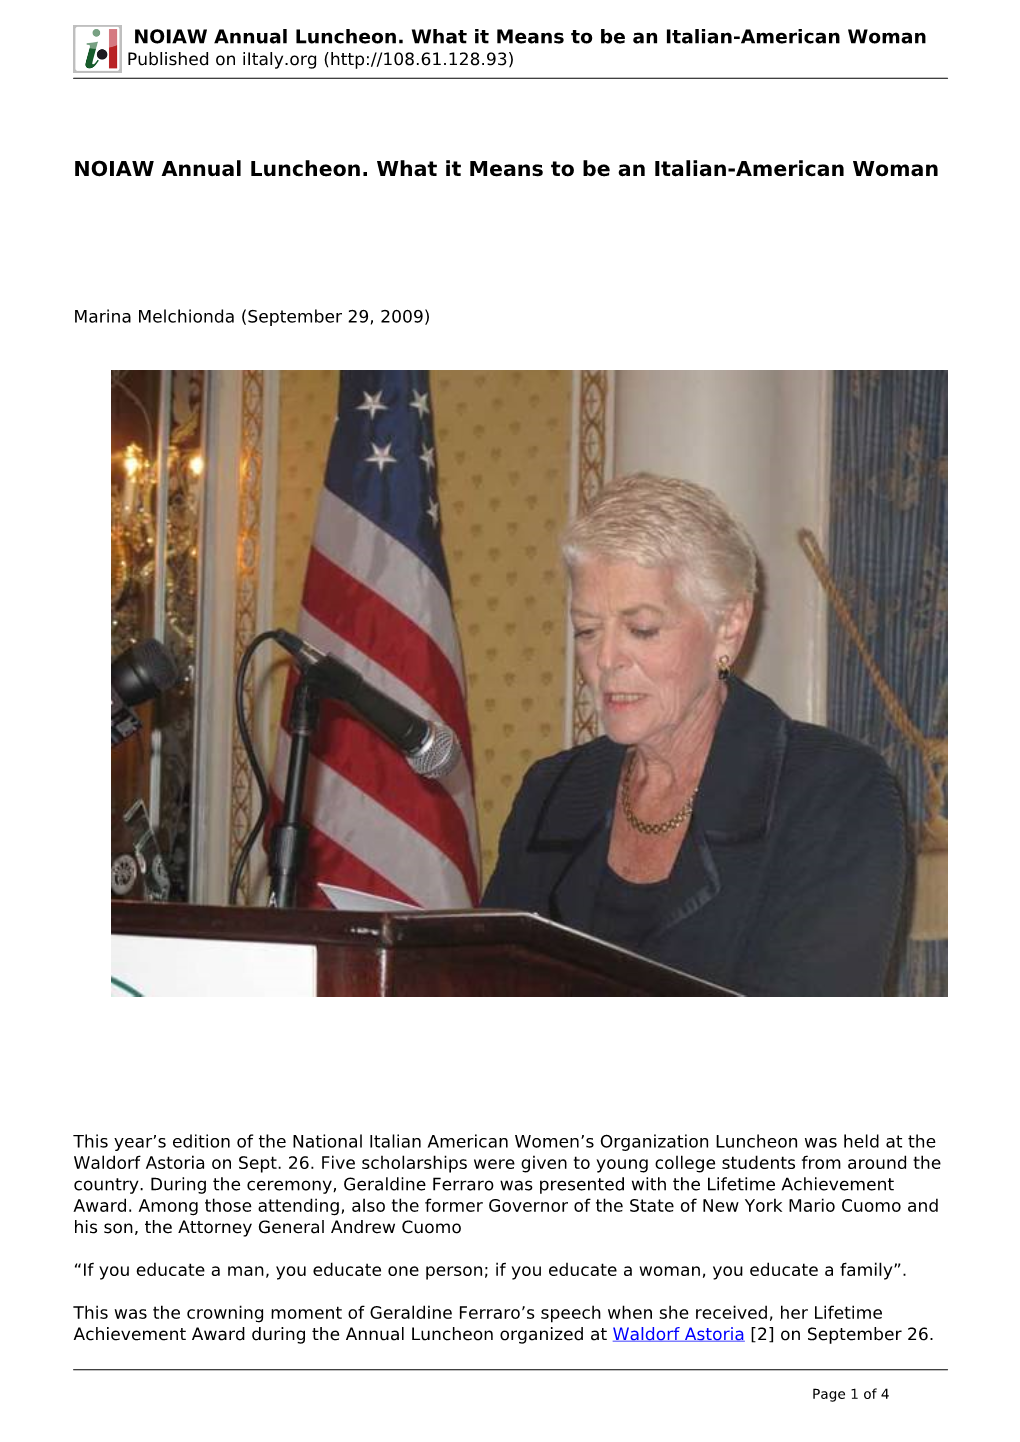 NOIAW Annual Luncheon. What It Means to Be an Italian-American Woman Published on Iitaly.Org (